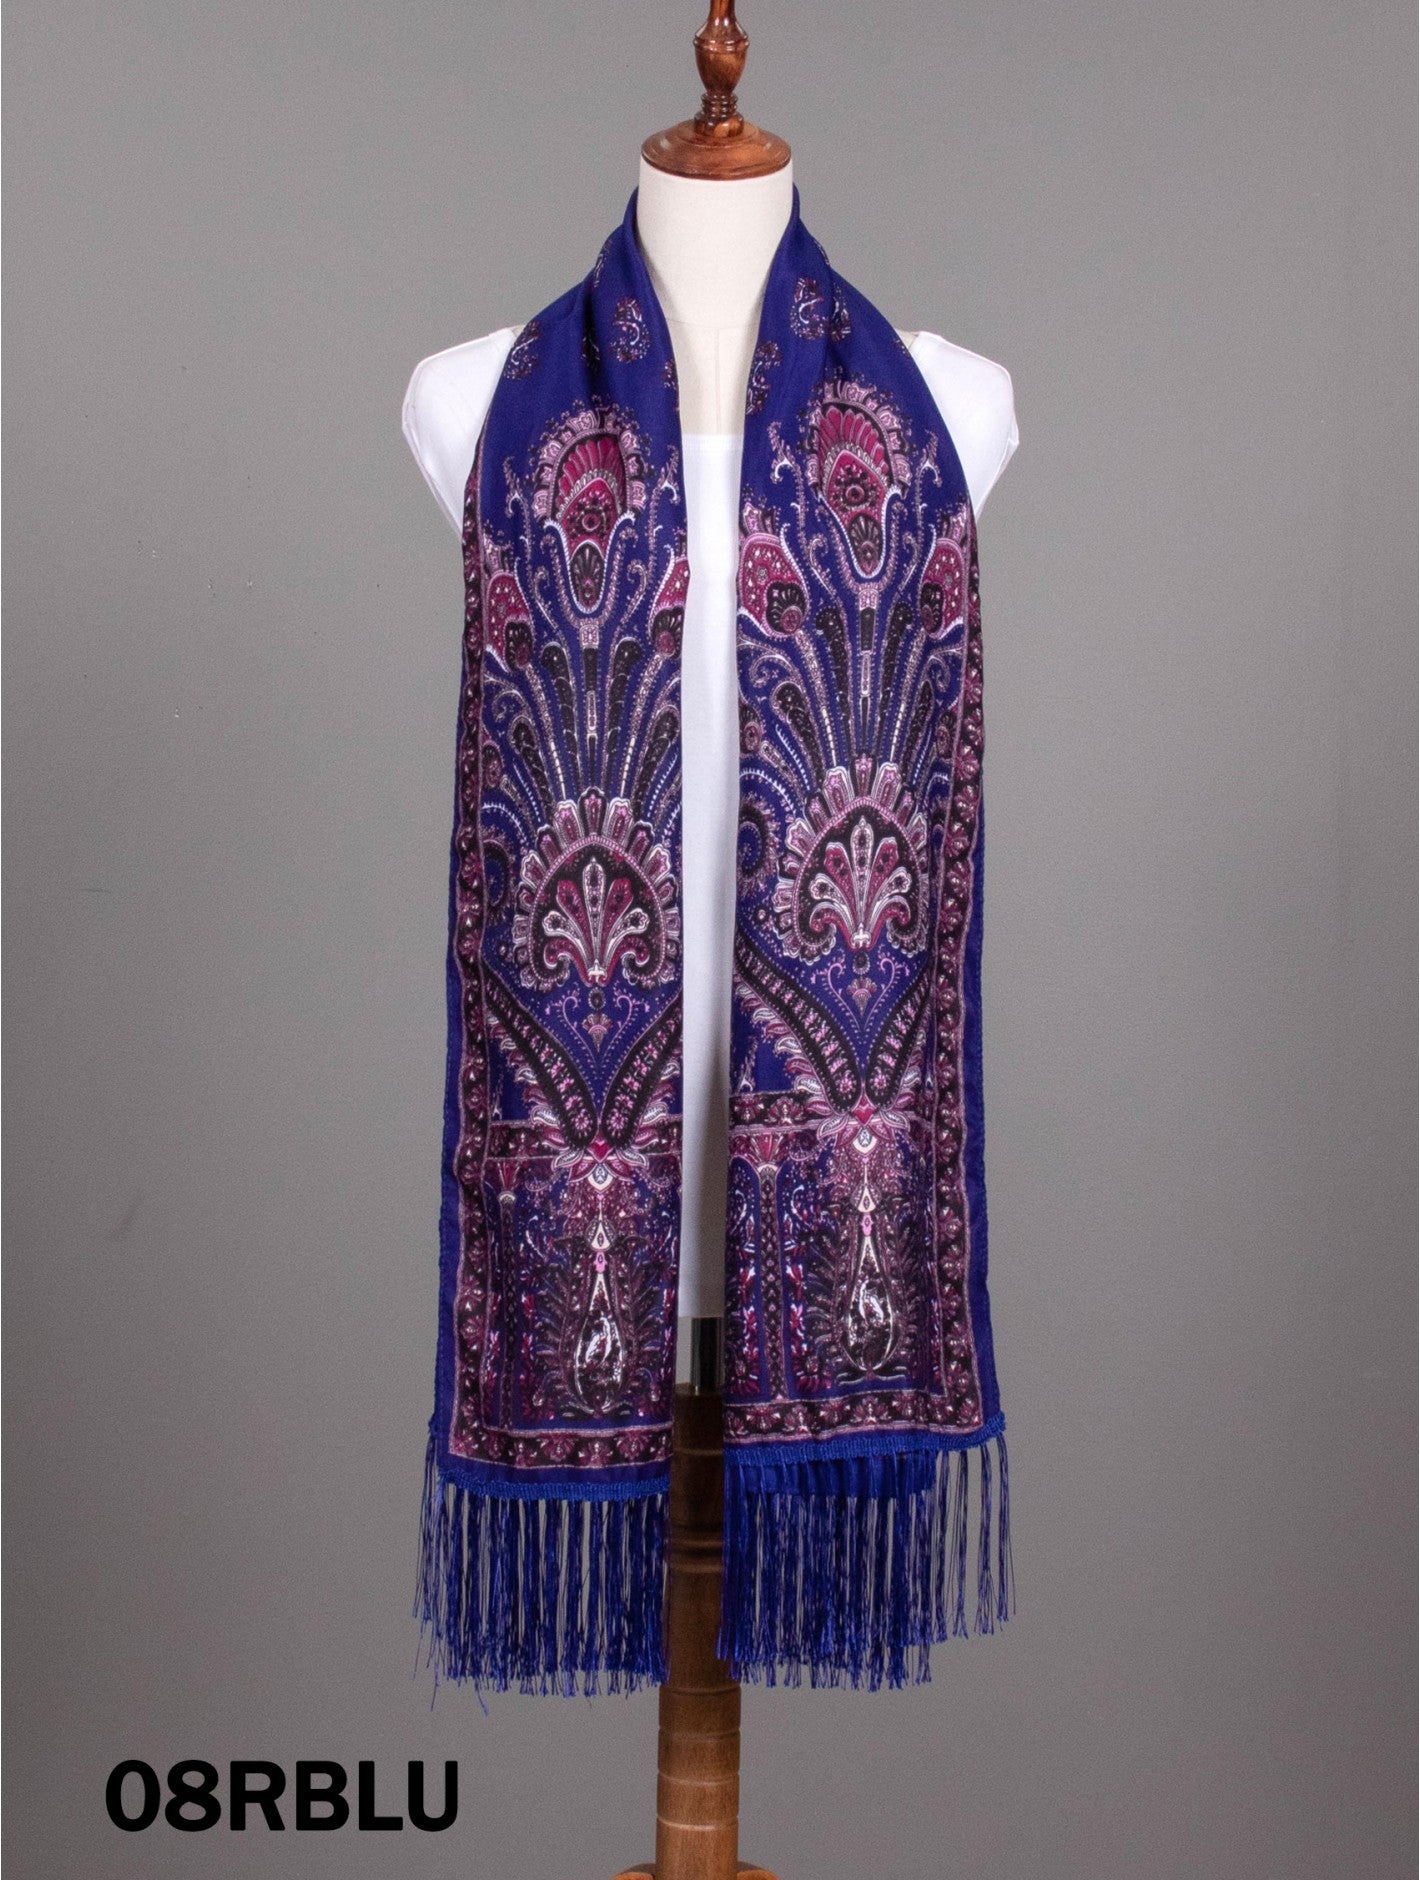 Pashmina Scarf - Paisley Print with Tassels (2 Colours available)